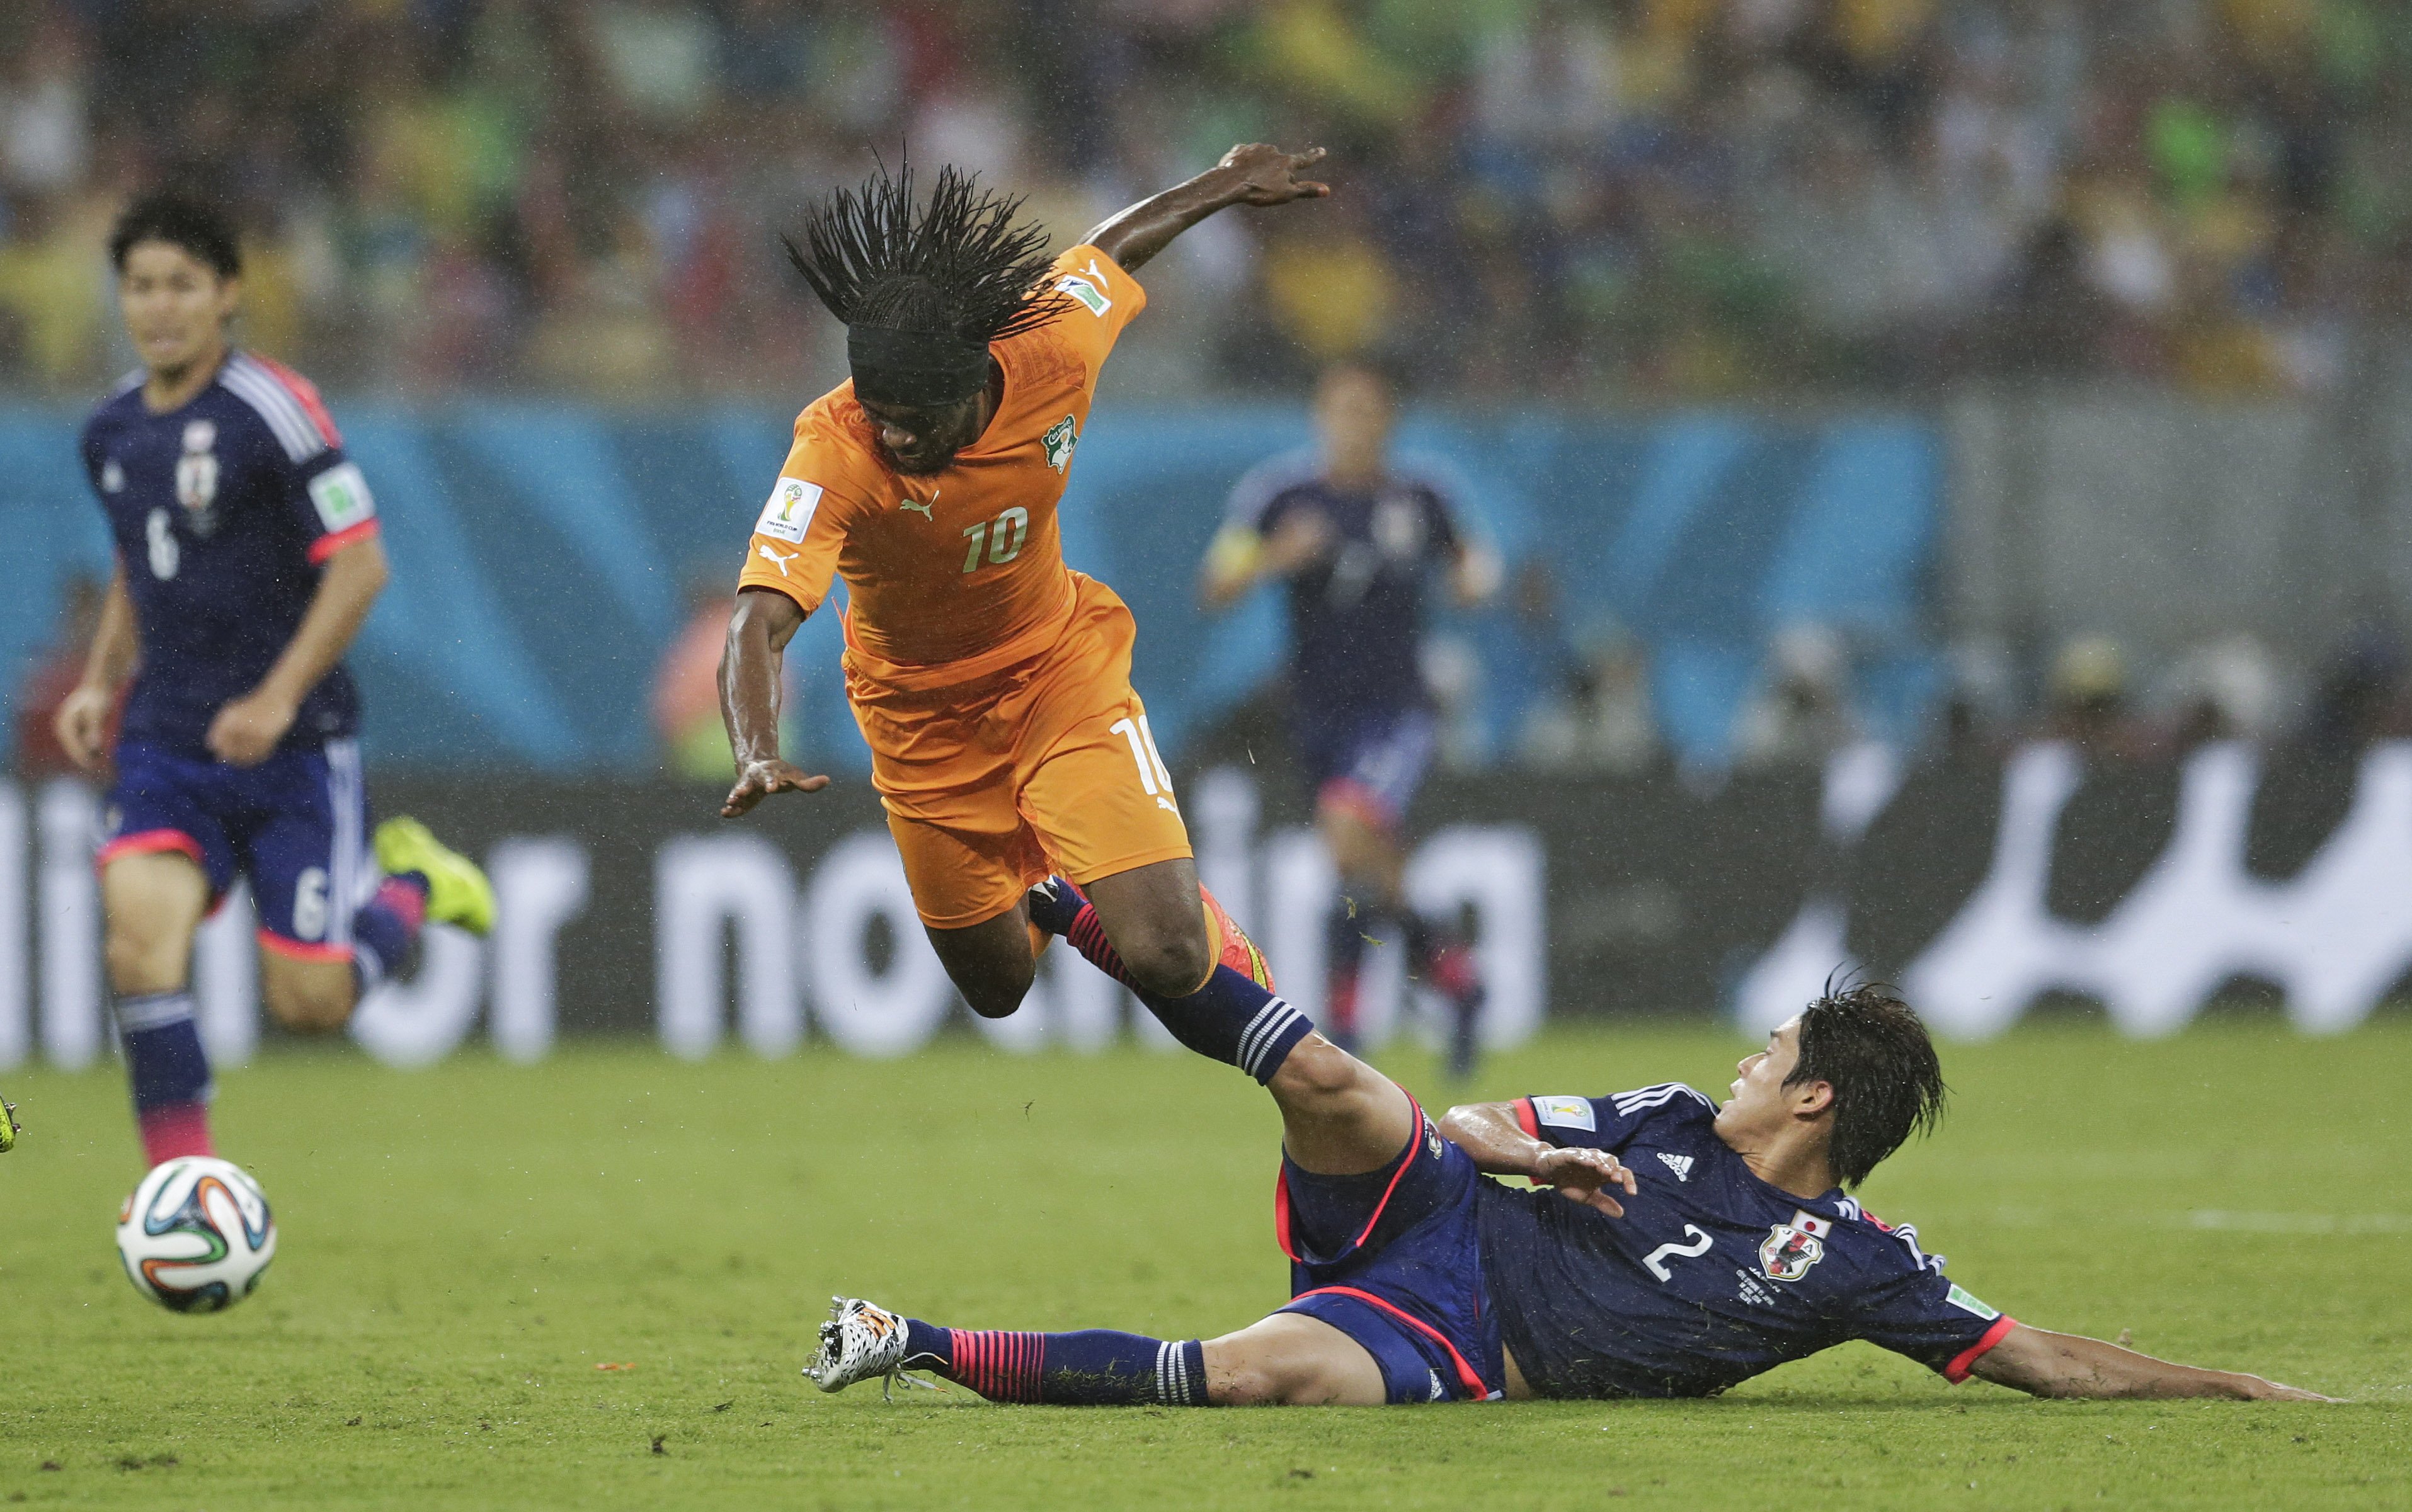 Ivory Coast's Gervinho is tripped by Japan's Atsuto Uchida during the match at the Arena Pernambuco in Recife, Brazil on June 14, 2014.